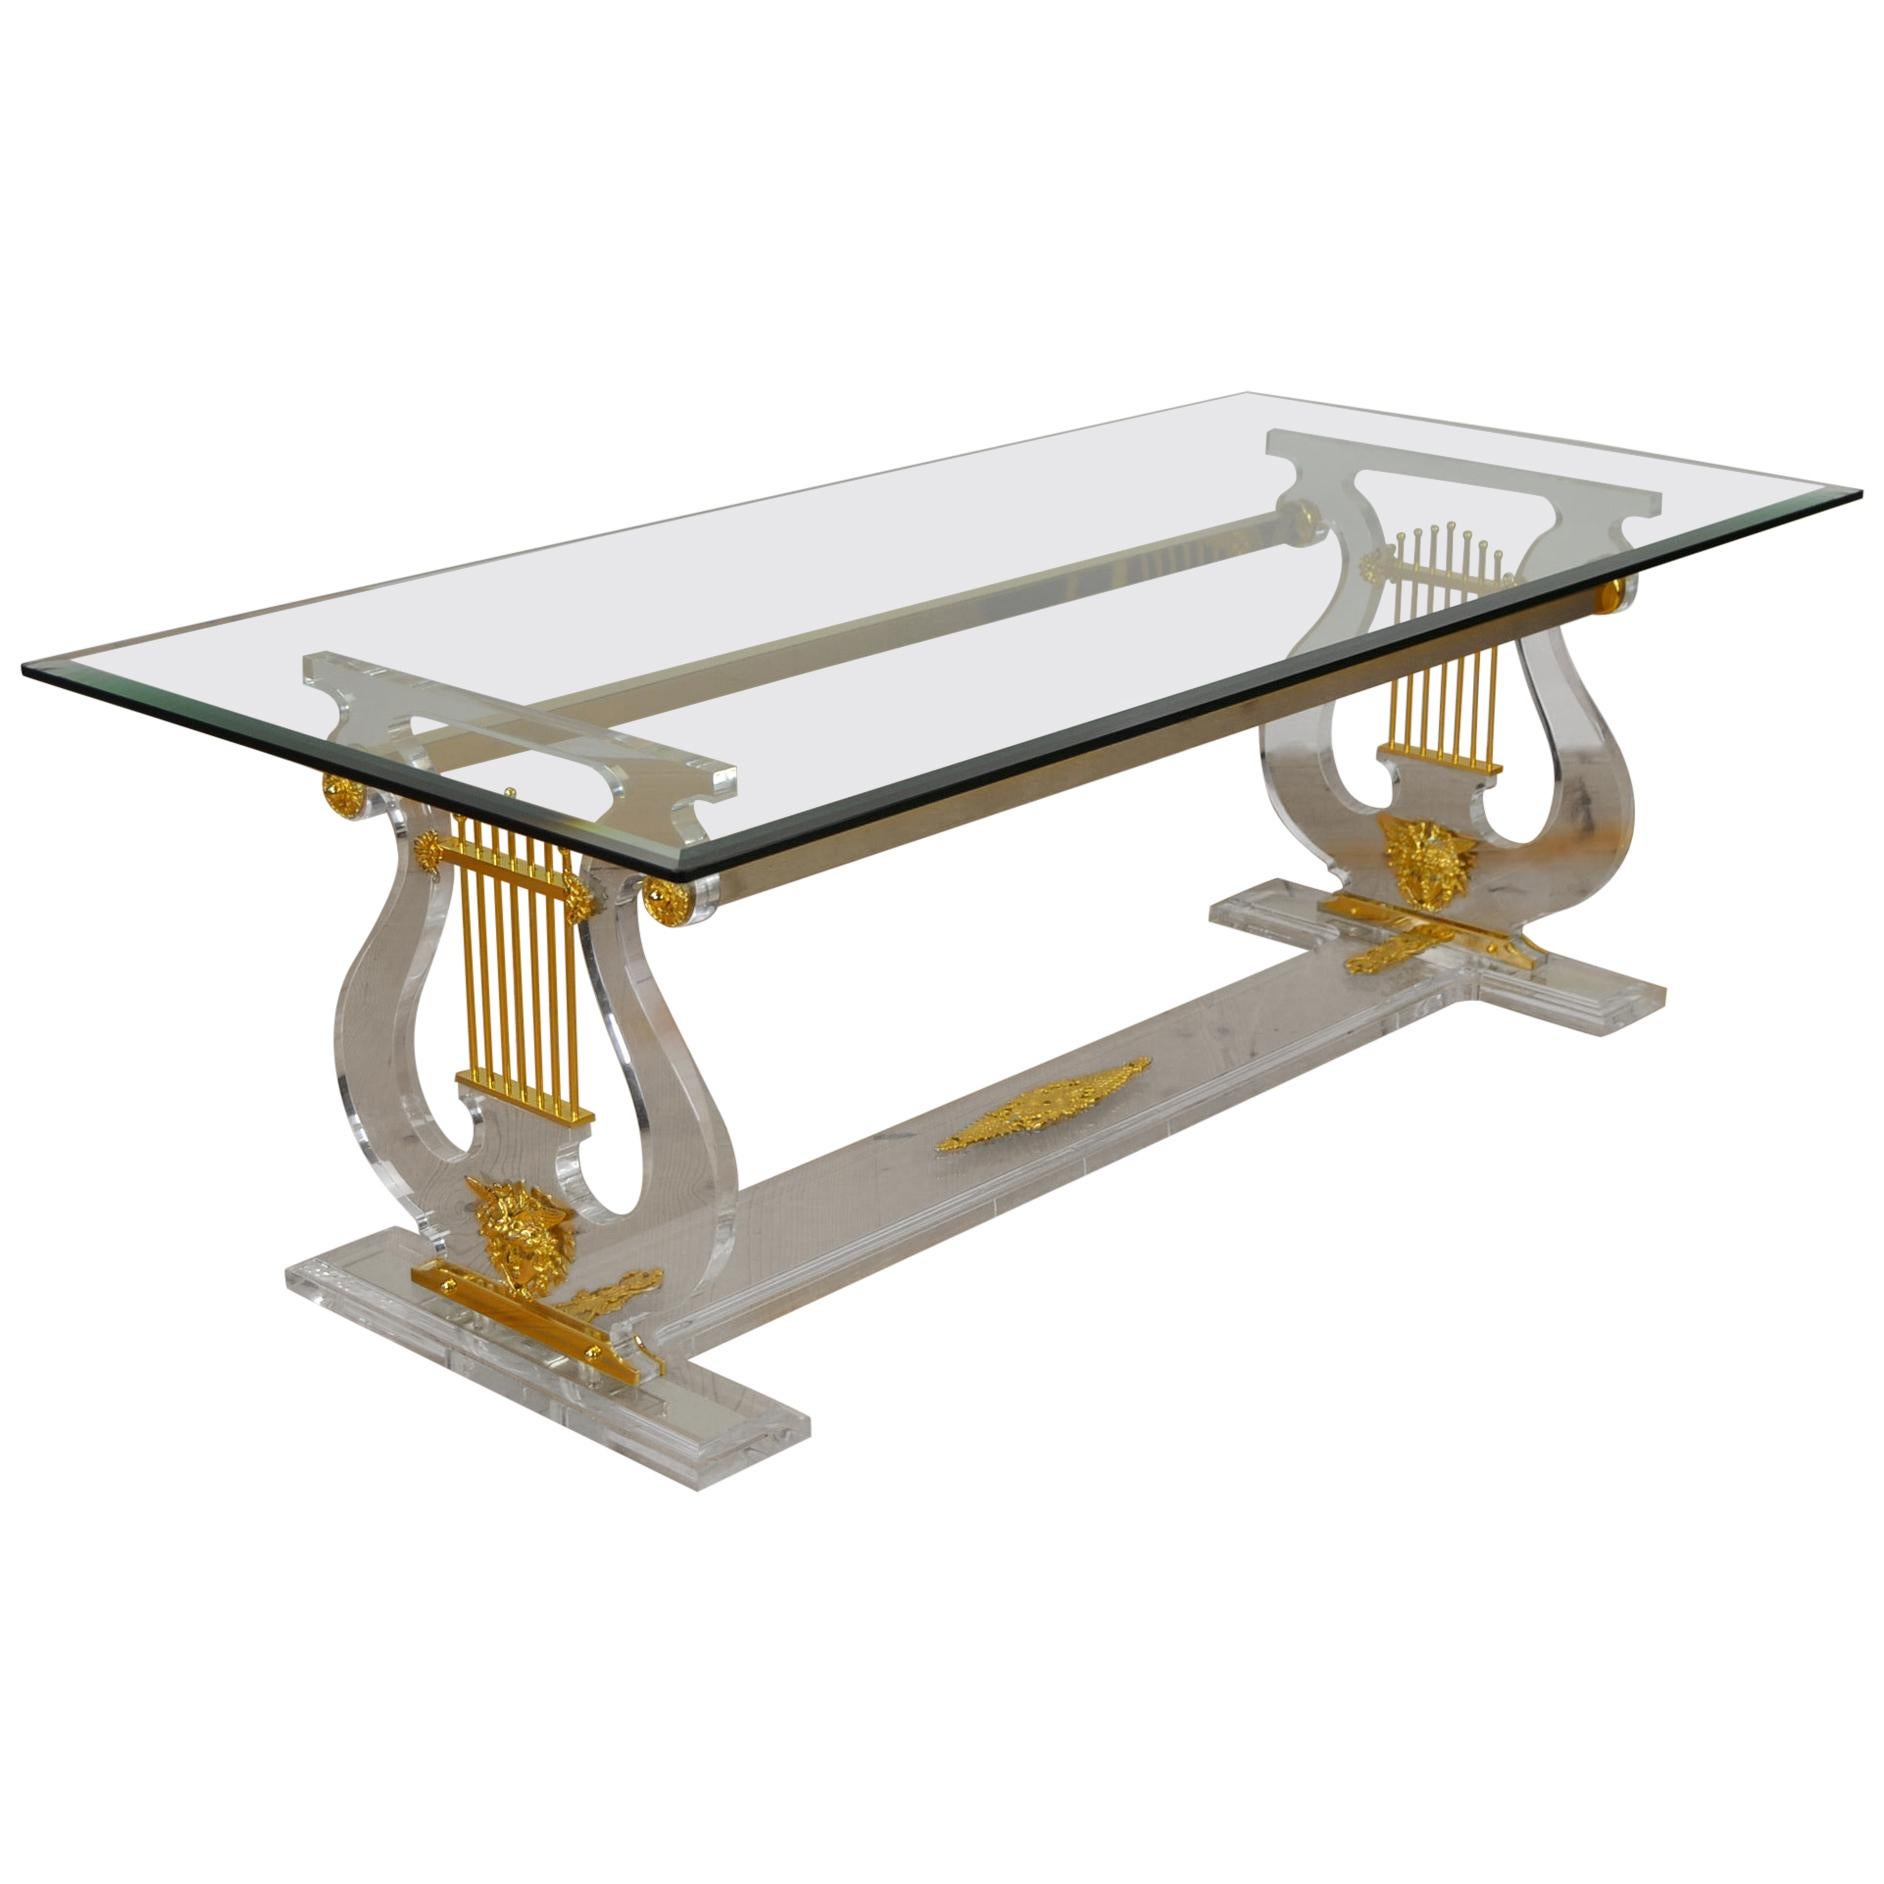 Lyre Coffee Table, Lucite Base with Beveled Glass Table Top, Hollywood Regency